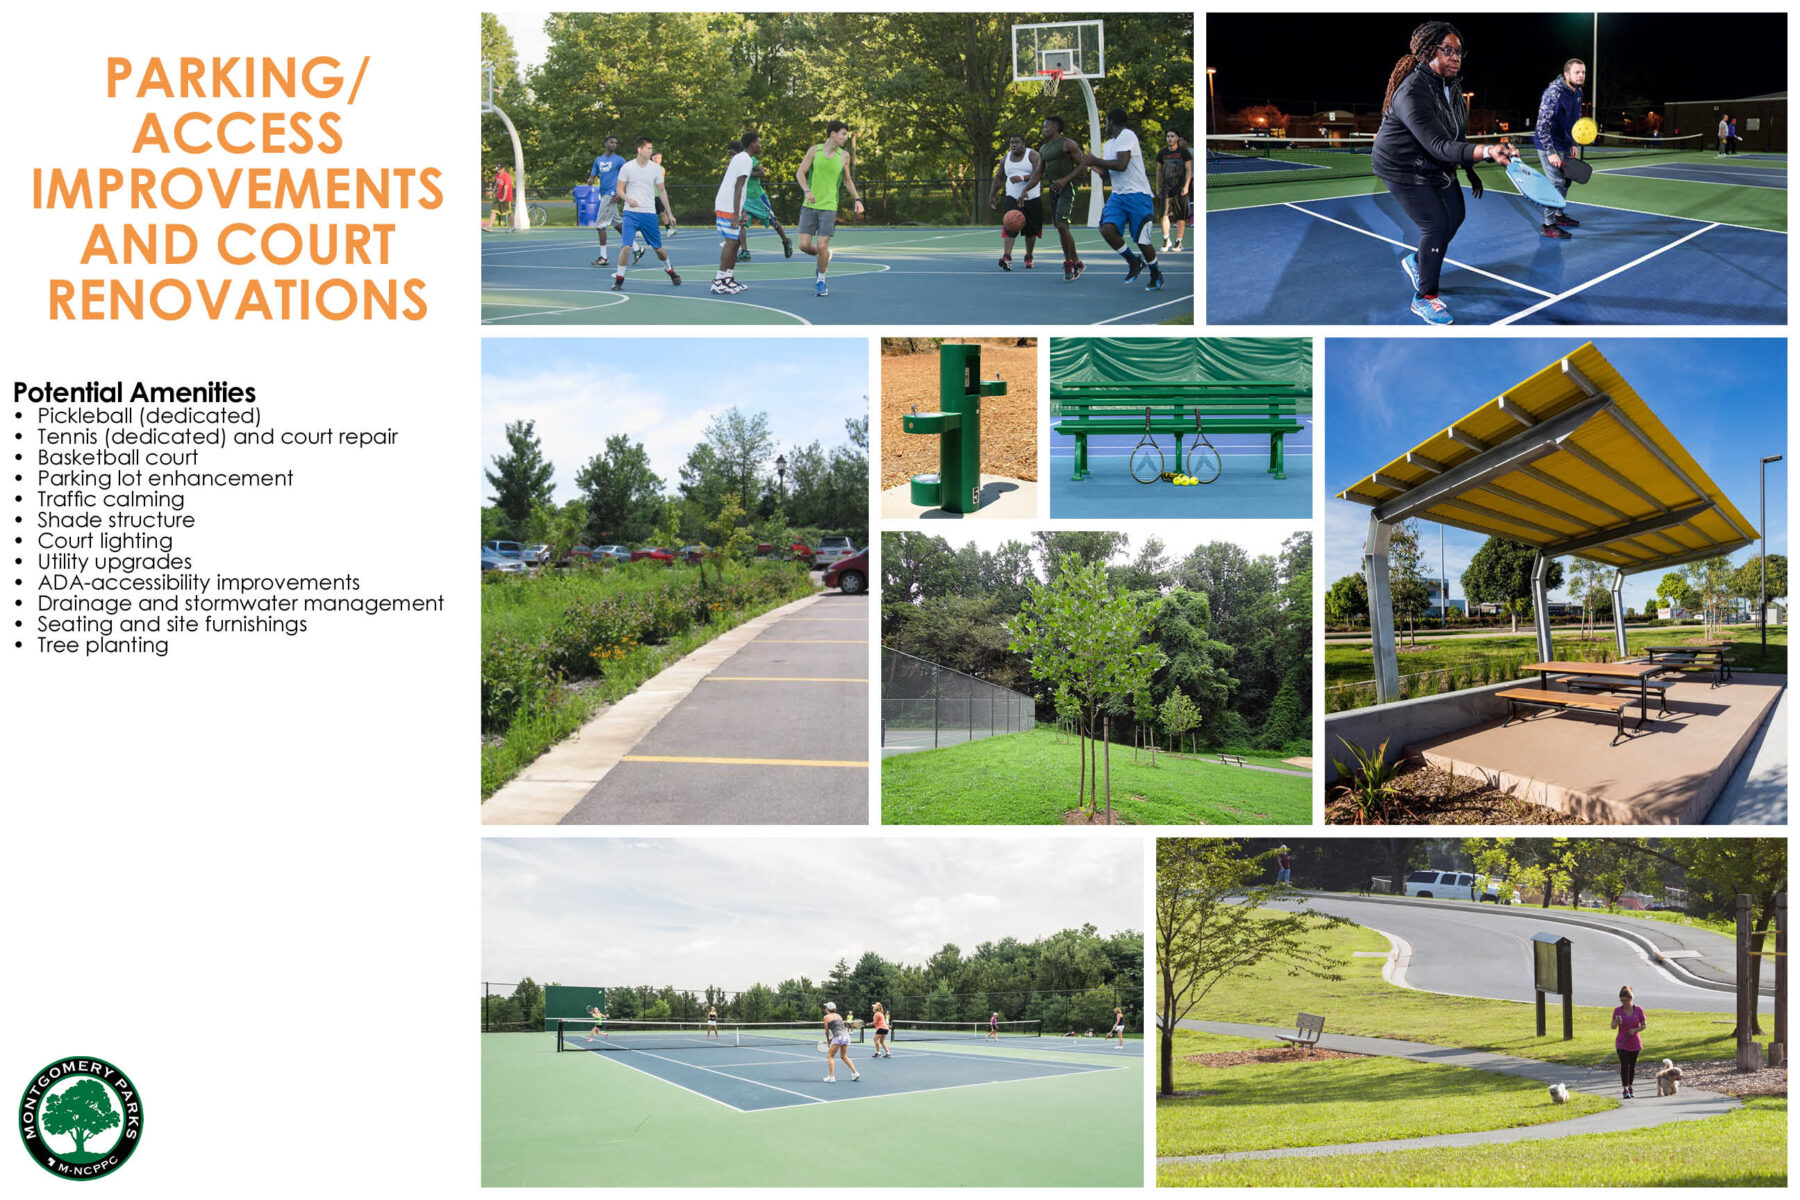 Image showing the potential amenities to be added at the Rubini Complex area, shwoing basketball court, pickleball, upgraded parking lot, water fountain, tennis,  tree plantings, shaded seating area, and walking loop. 